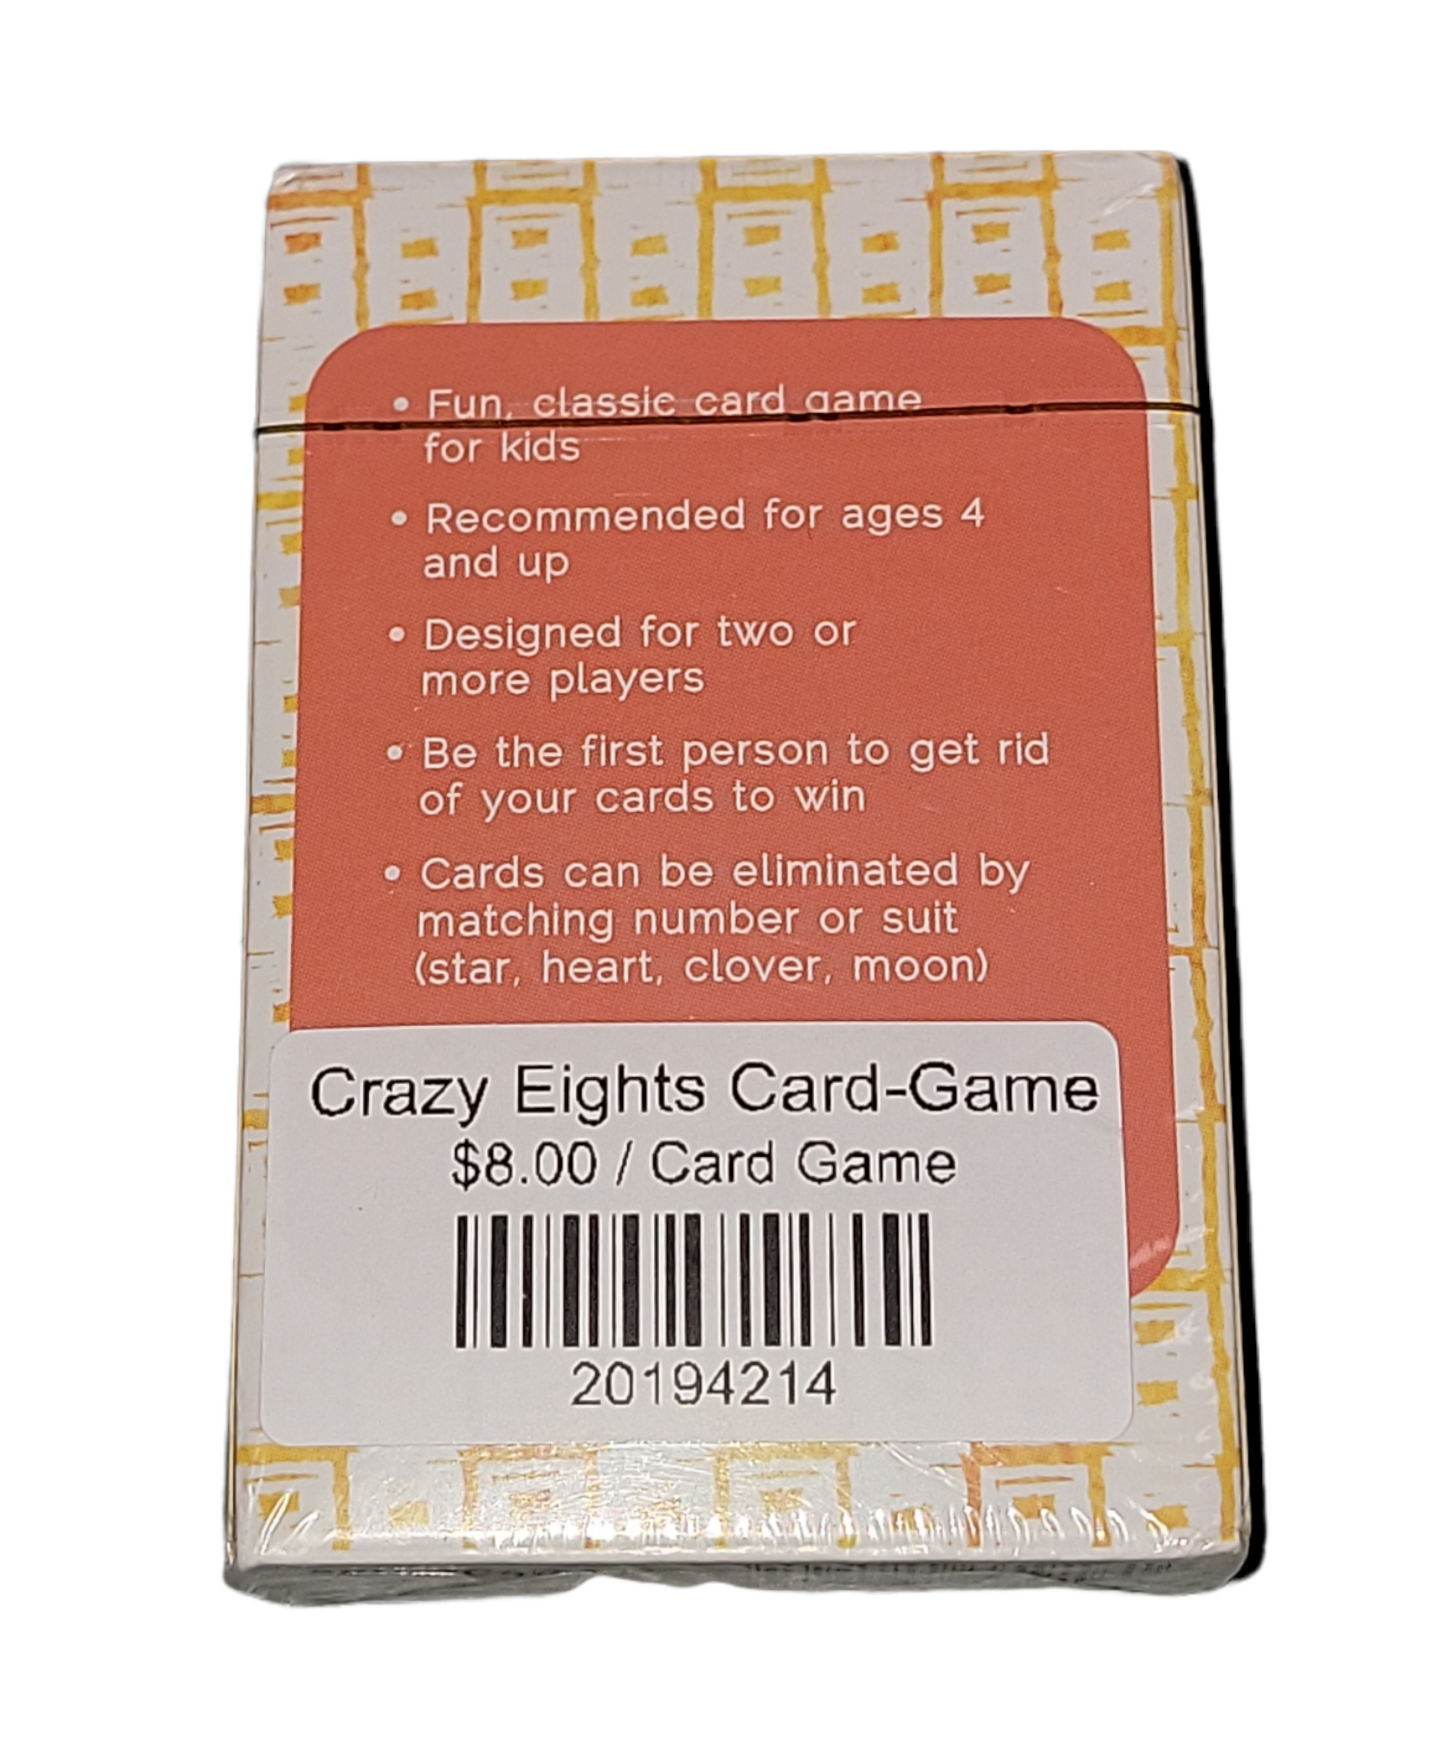 Crazy Eights Card-Game